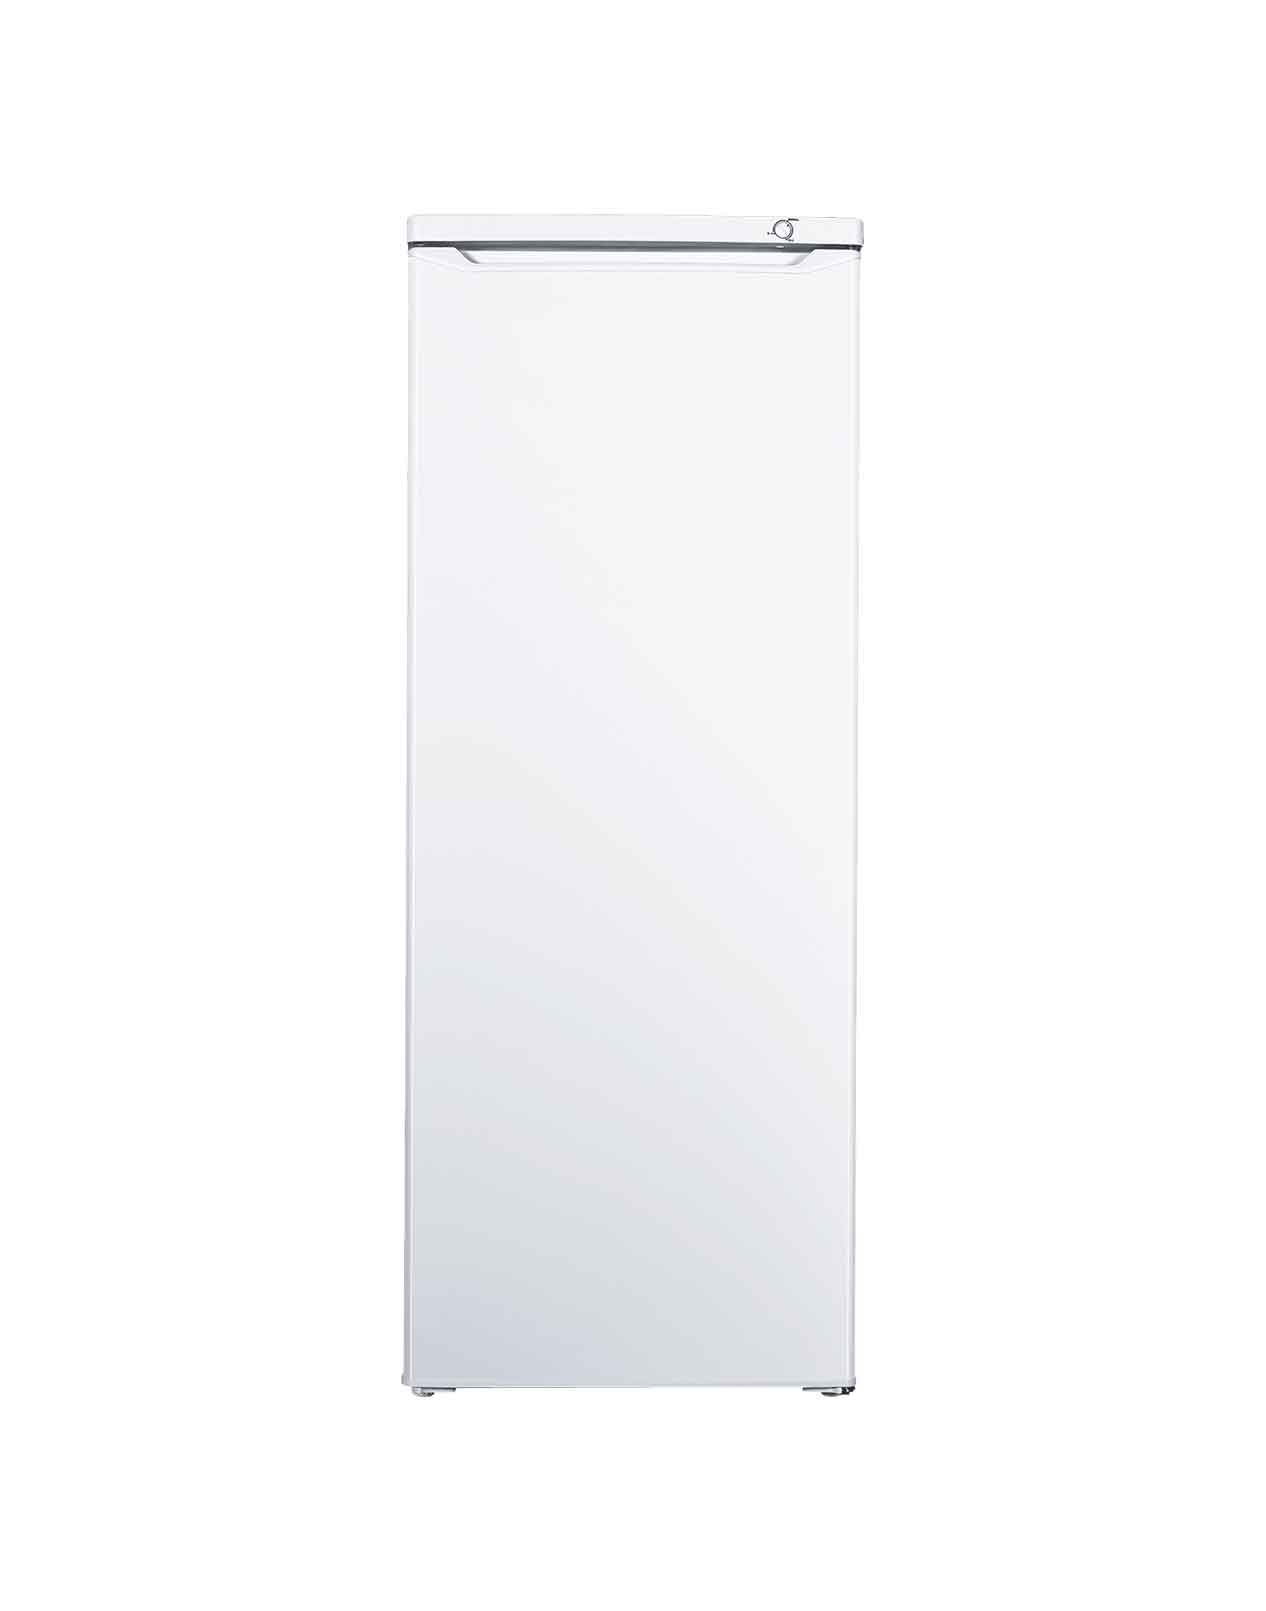 Eurotech Vertical Freezer 183L White - MyHome - Easy pay, affordable ...